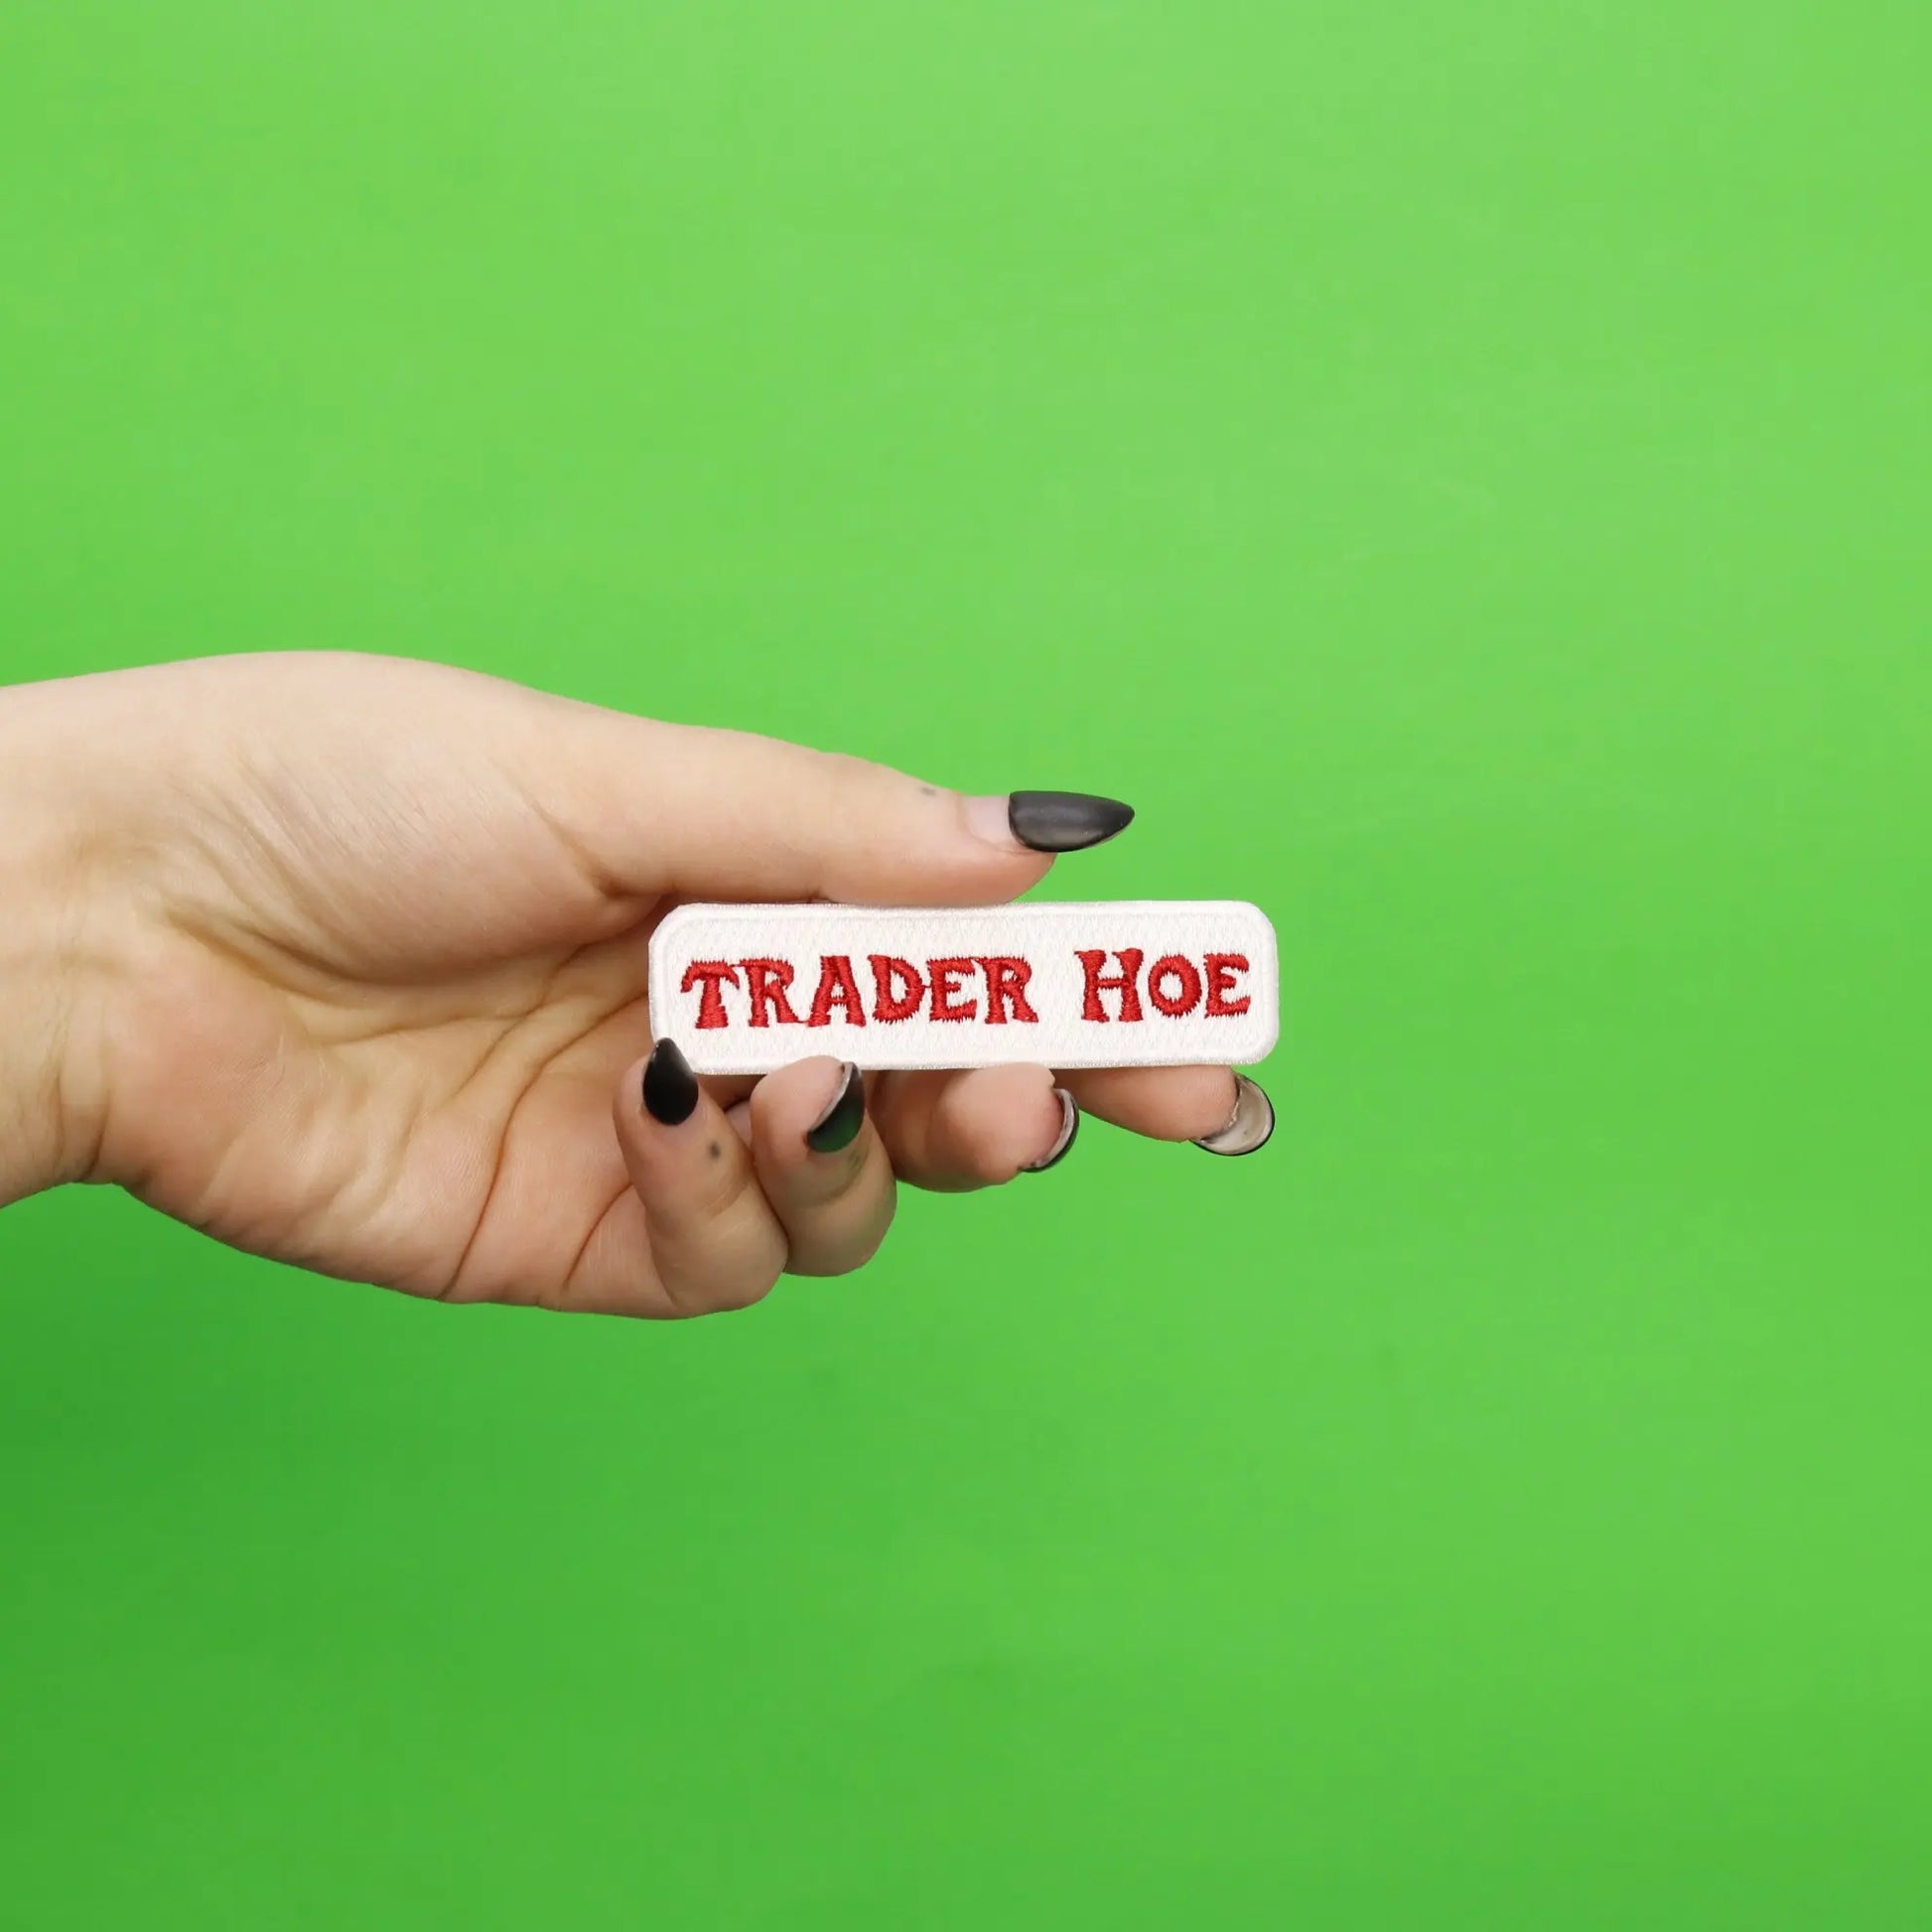 Trader Hoe Box Logo Embroidered Iron On Patch 